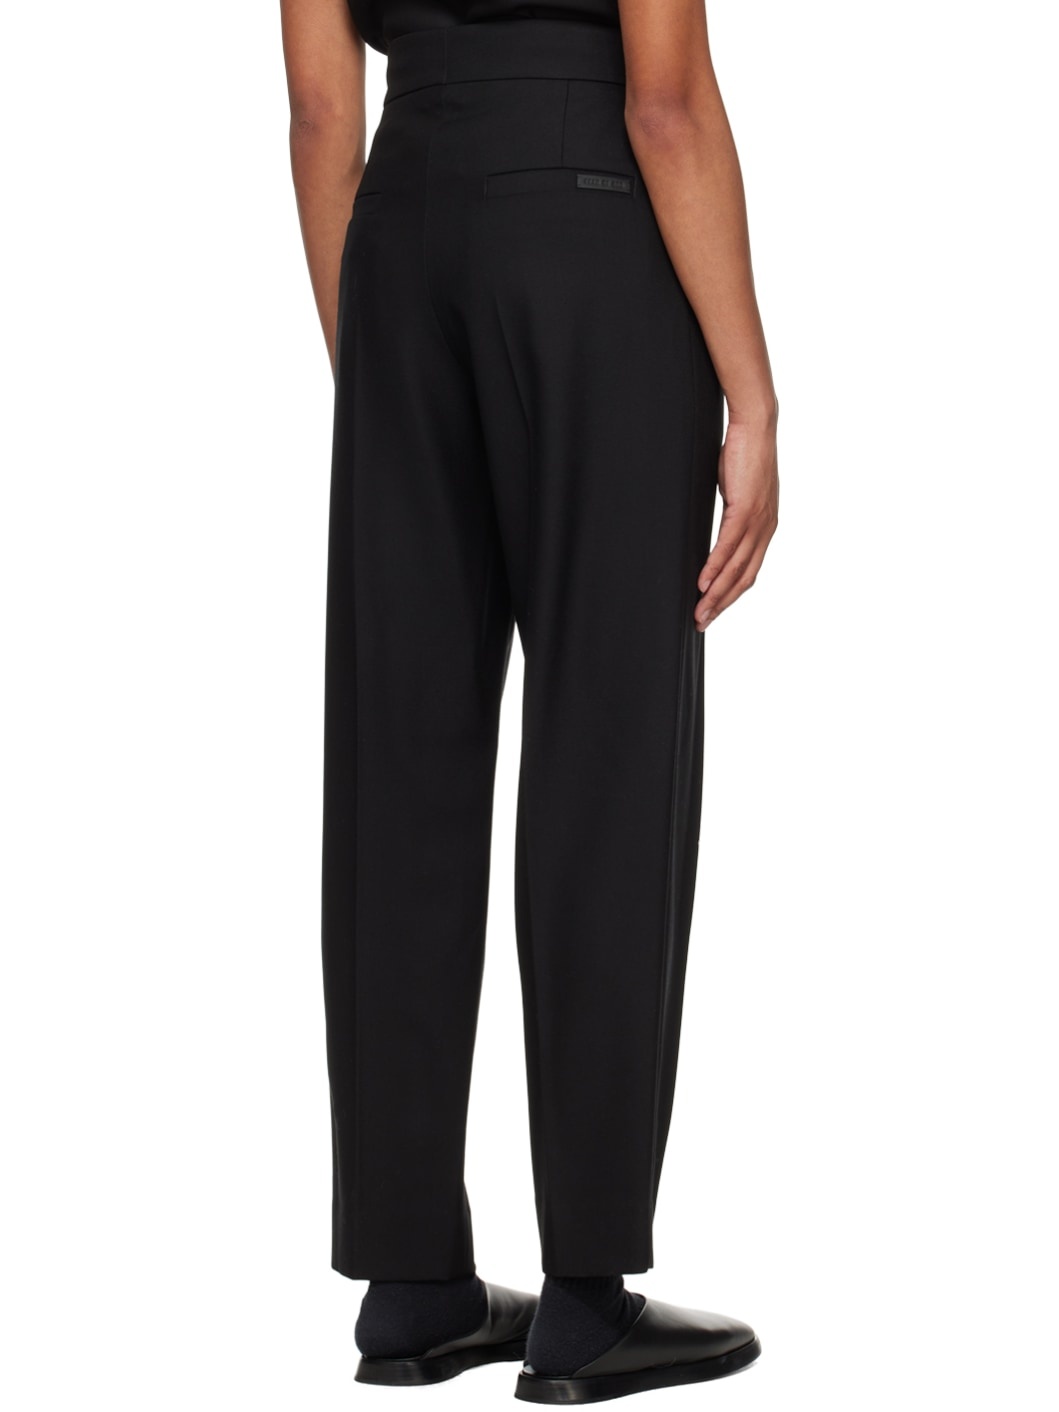 Black Tapered Trousers - 3